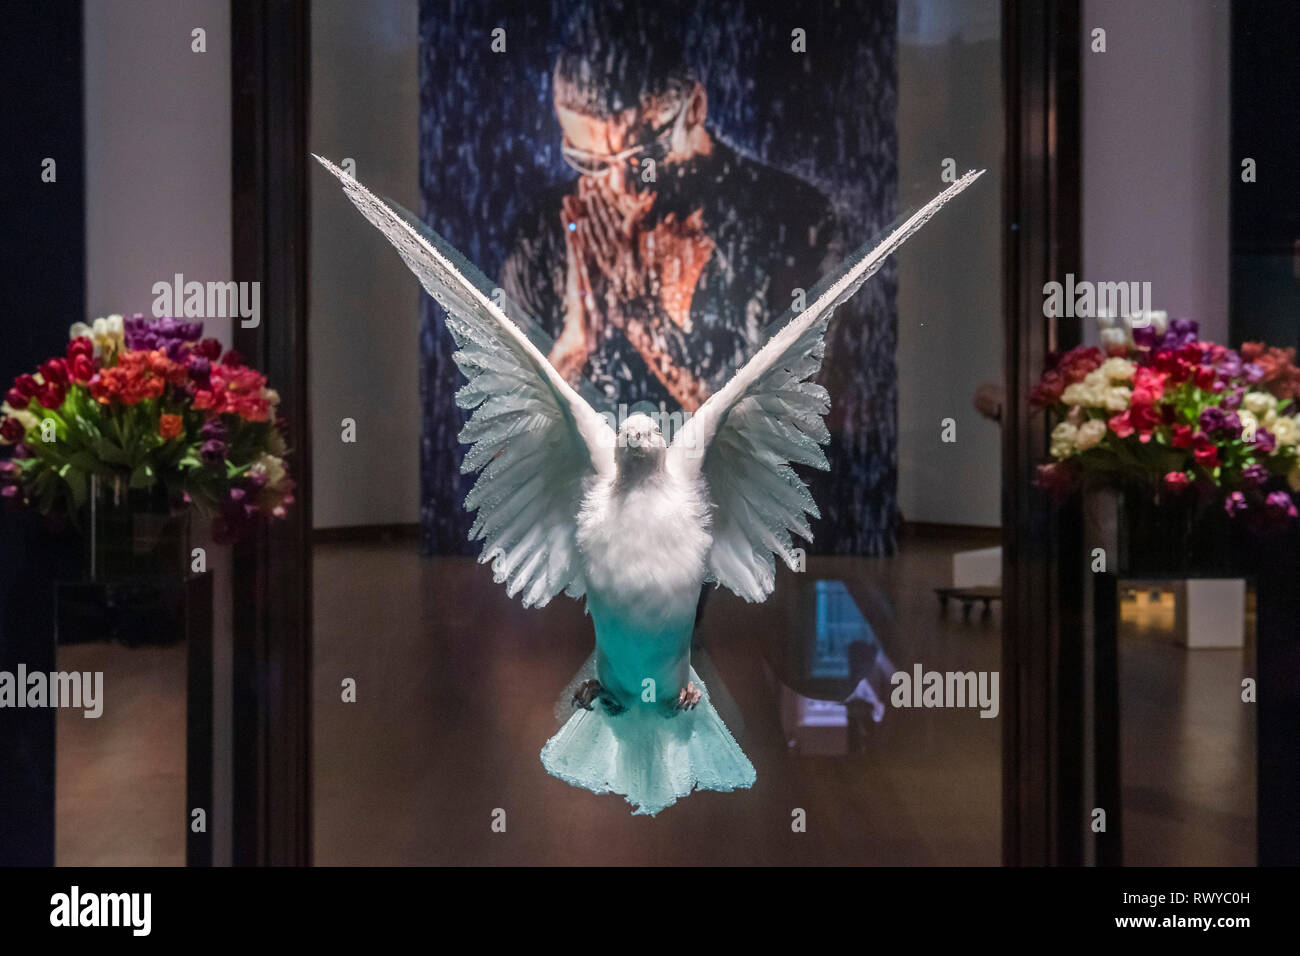 STRICTLY EMBARGOED UNTIL 23:00PM ON FRIDAY 8TH MARCH 2019. Christie's King Street, London, UK. 8th Mar, 2019.Damien Hirst, The Incomplete Truth, Executed in 2006, est £1-1.5m - Christie's presents an exhibition of works from its upcoming The George Michael Collection Evening and Online Auctions, on view to the public from 9-15 March 2019. Credit: Guy Bell/Alamy Live News Stock Photo